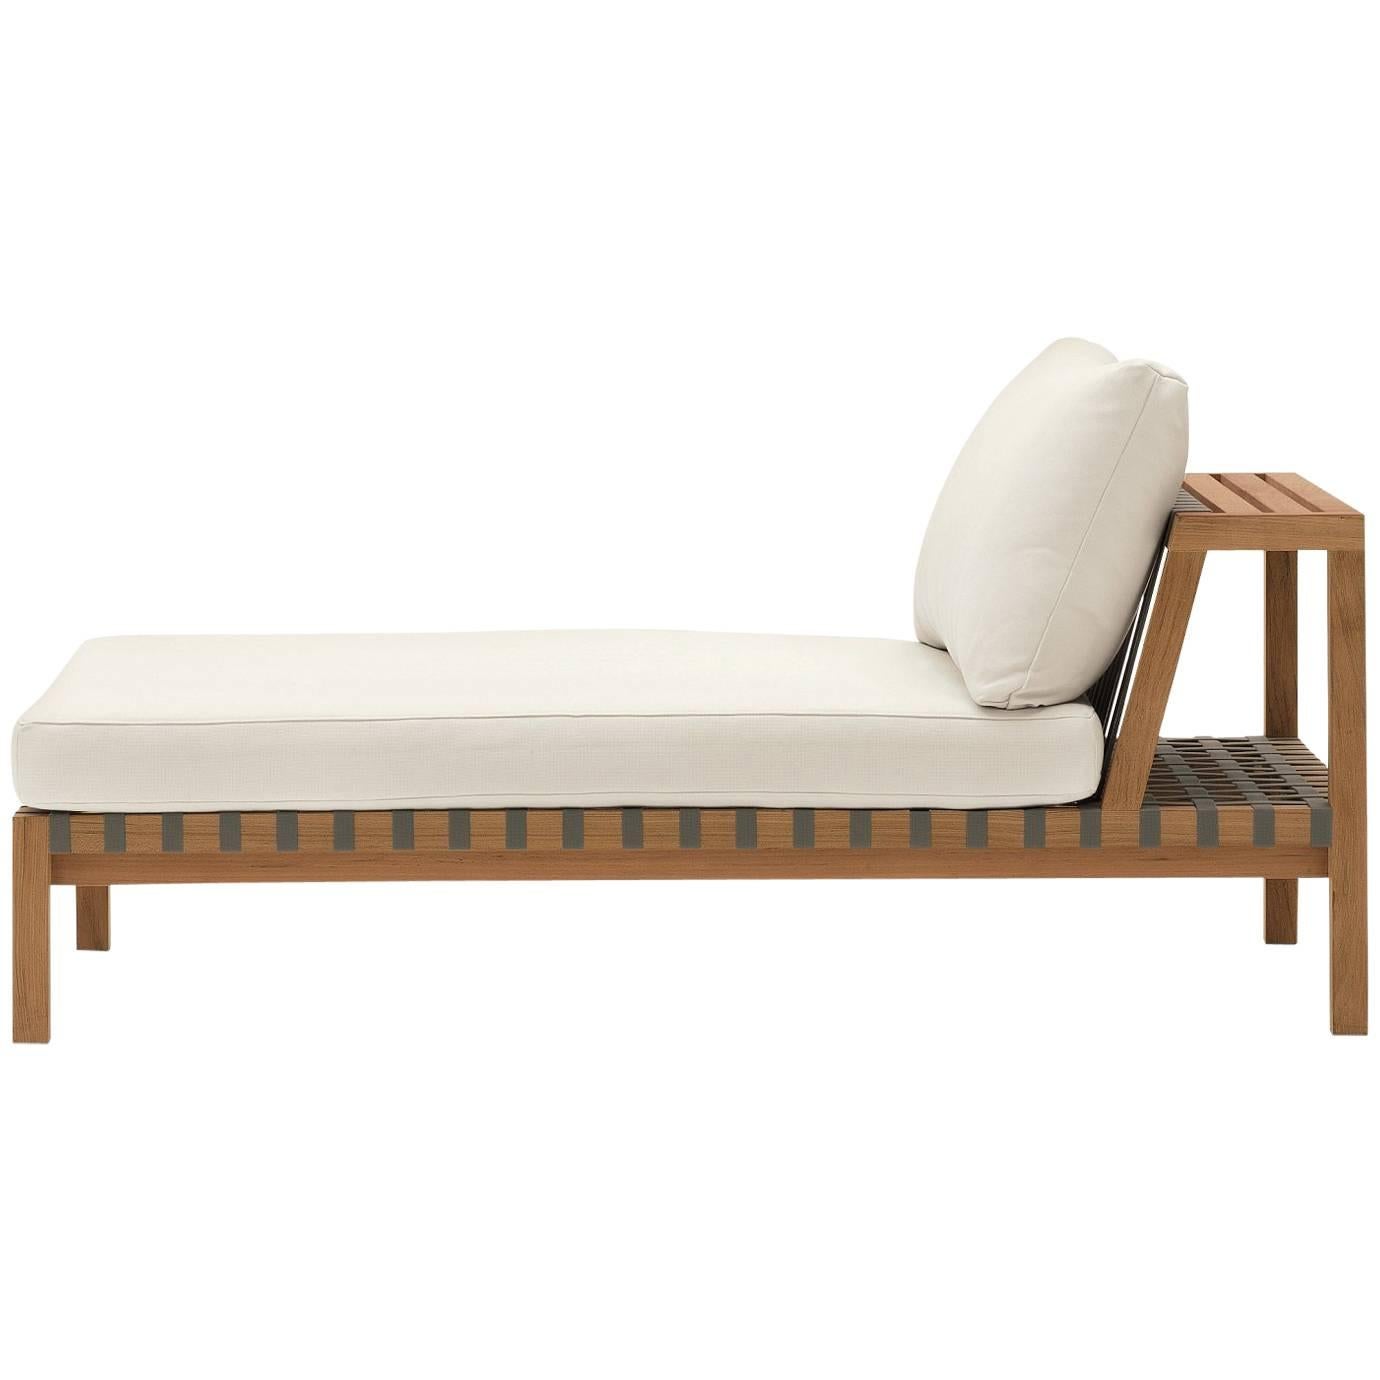 Roda Network 140 Outdoor Teak Chaise Longue For Sale